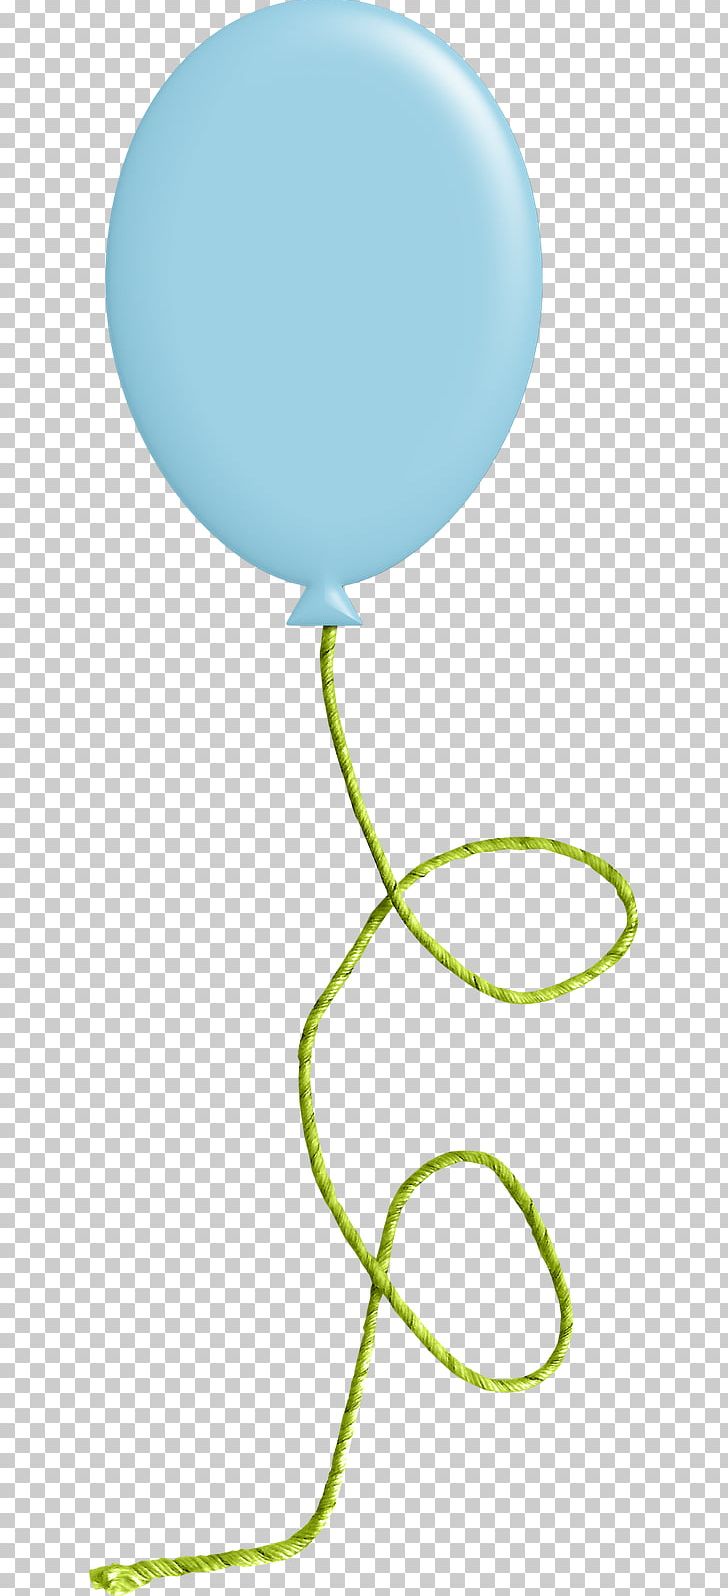 Photography Birthday Marco's Tattoo PNG, Clipart, Animation, Balloon, Birthday, Family, Green Free PNG Download